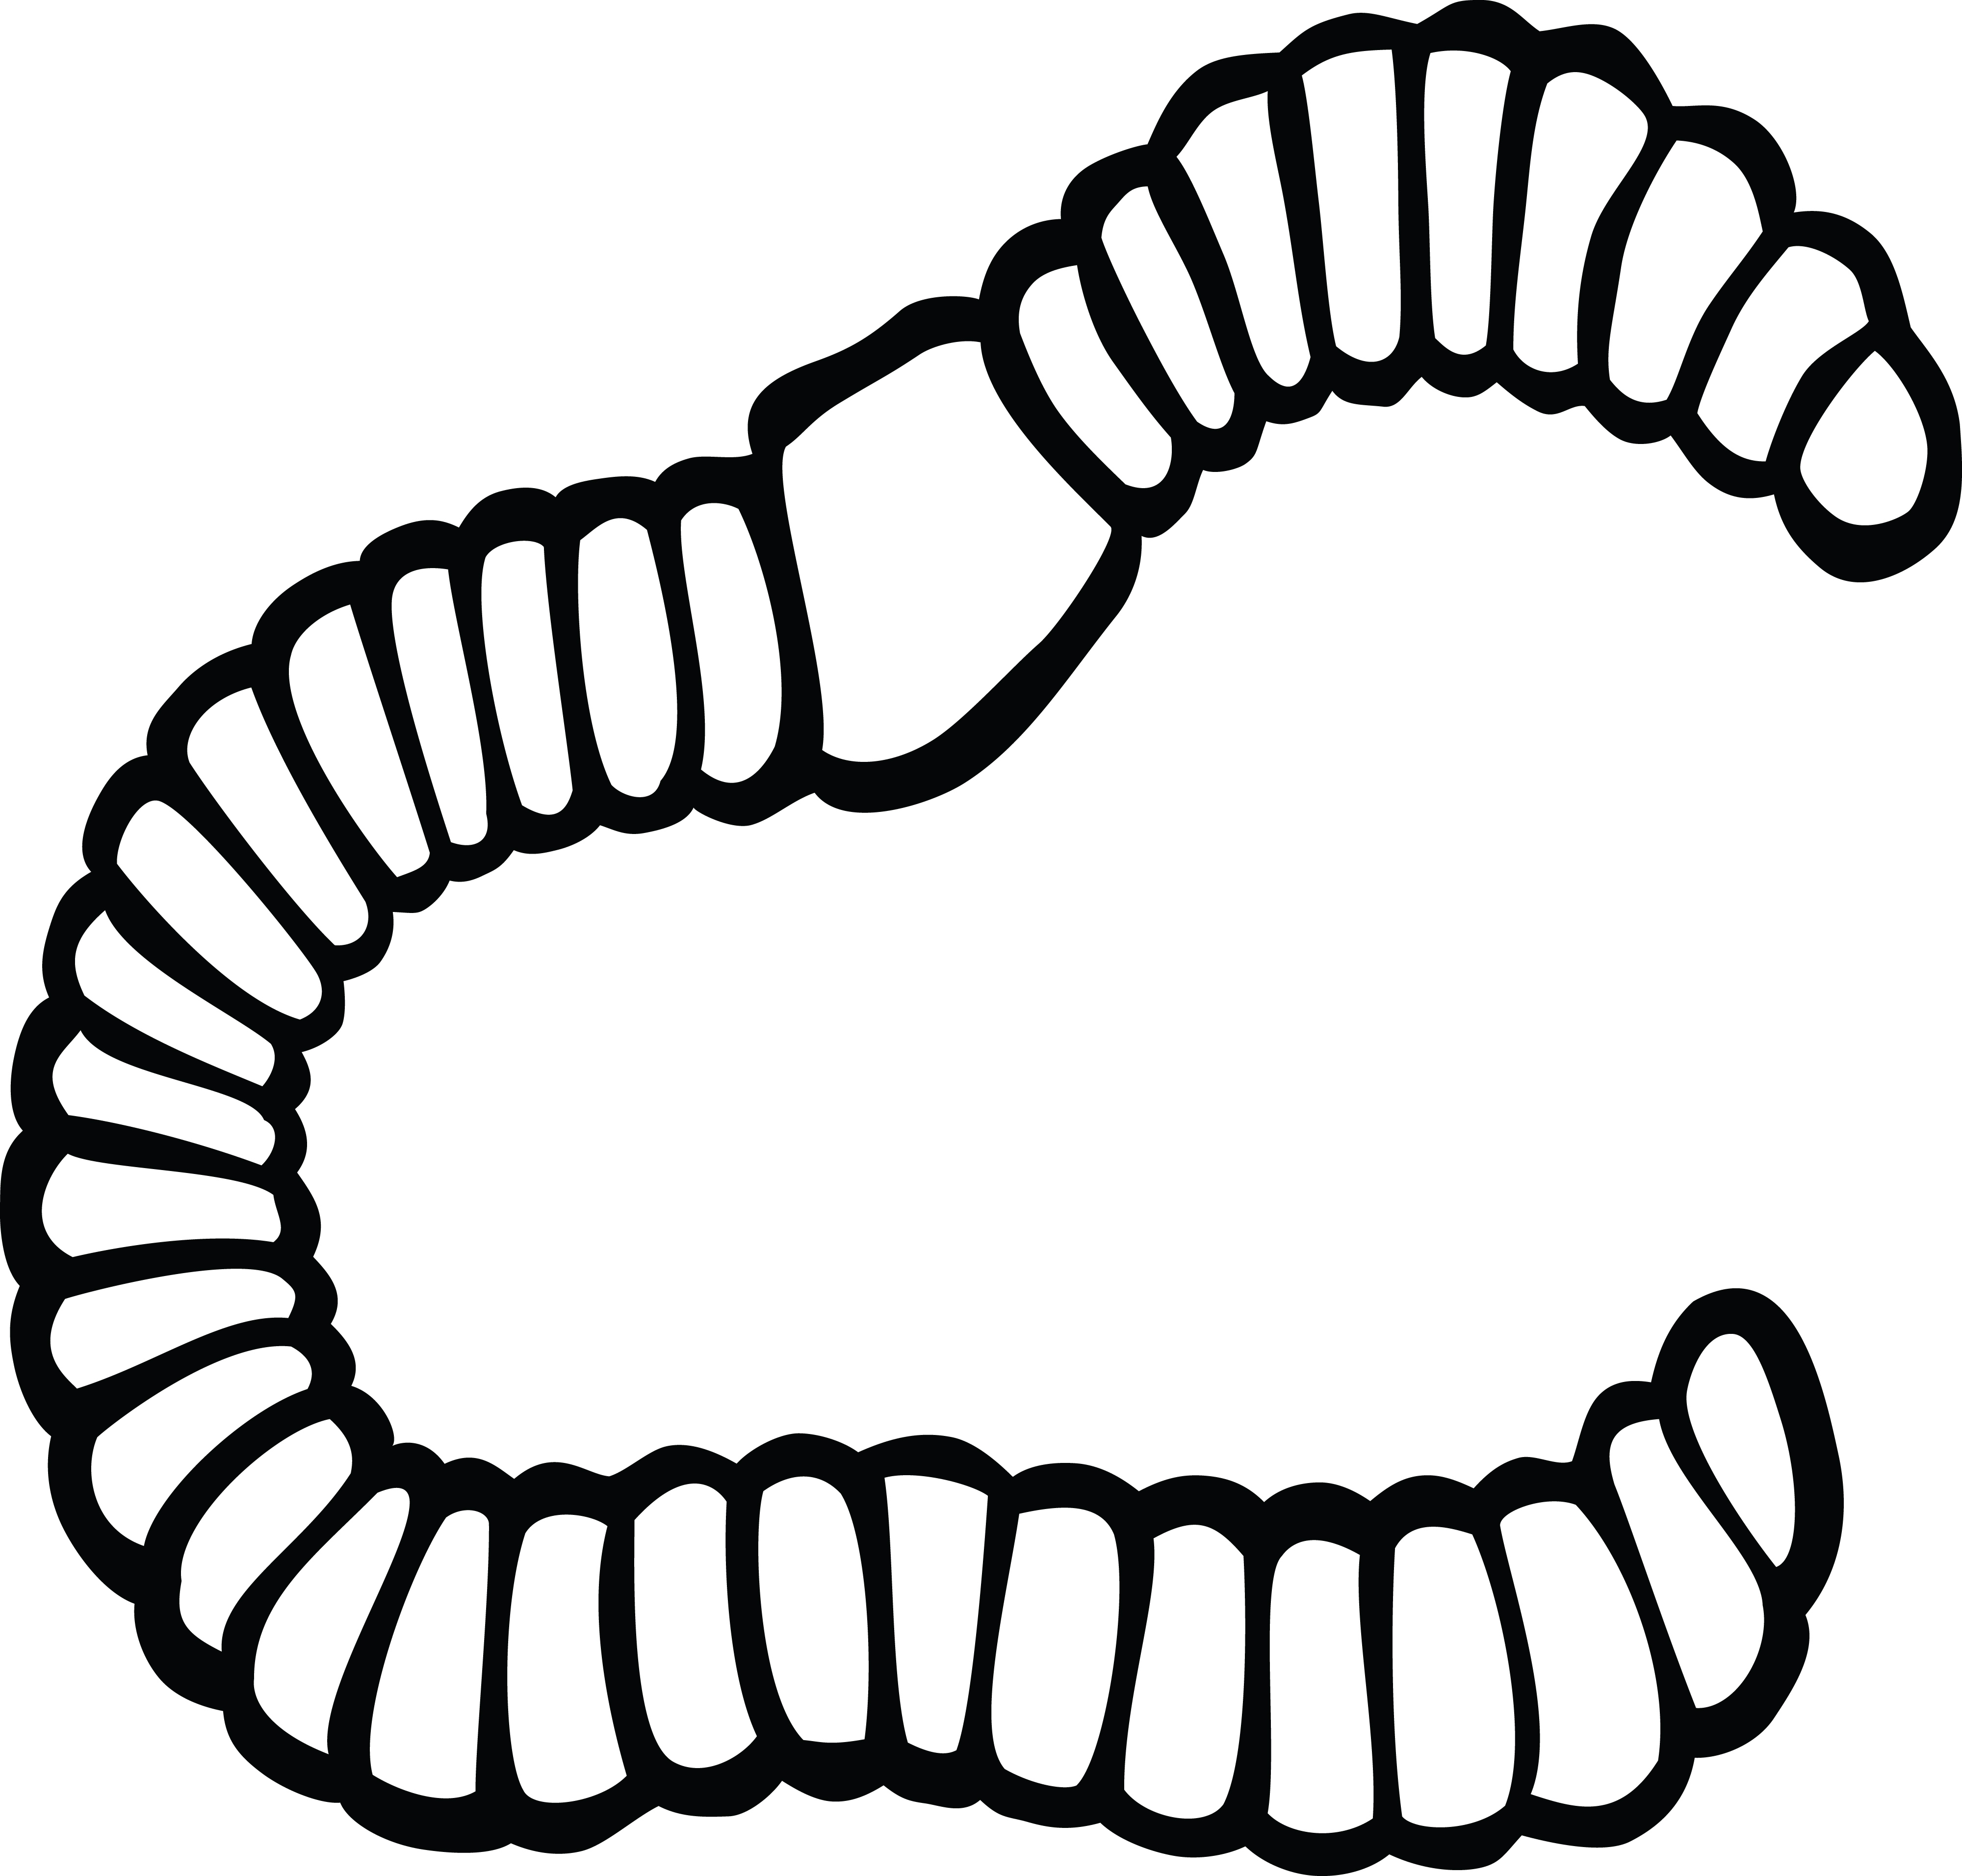 Worm clipart art, Worm art Transparent FREE for download on